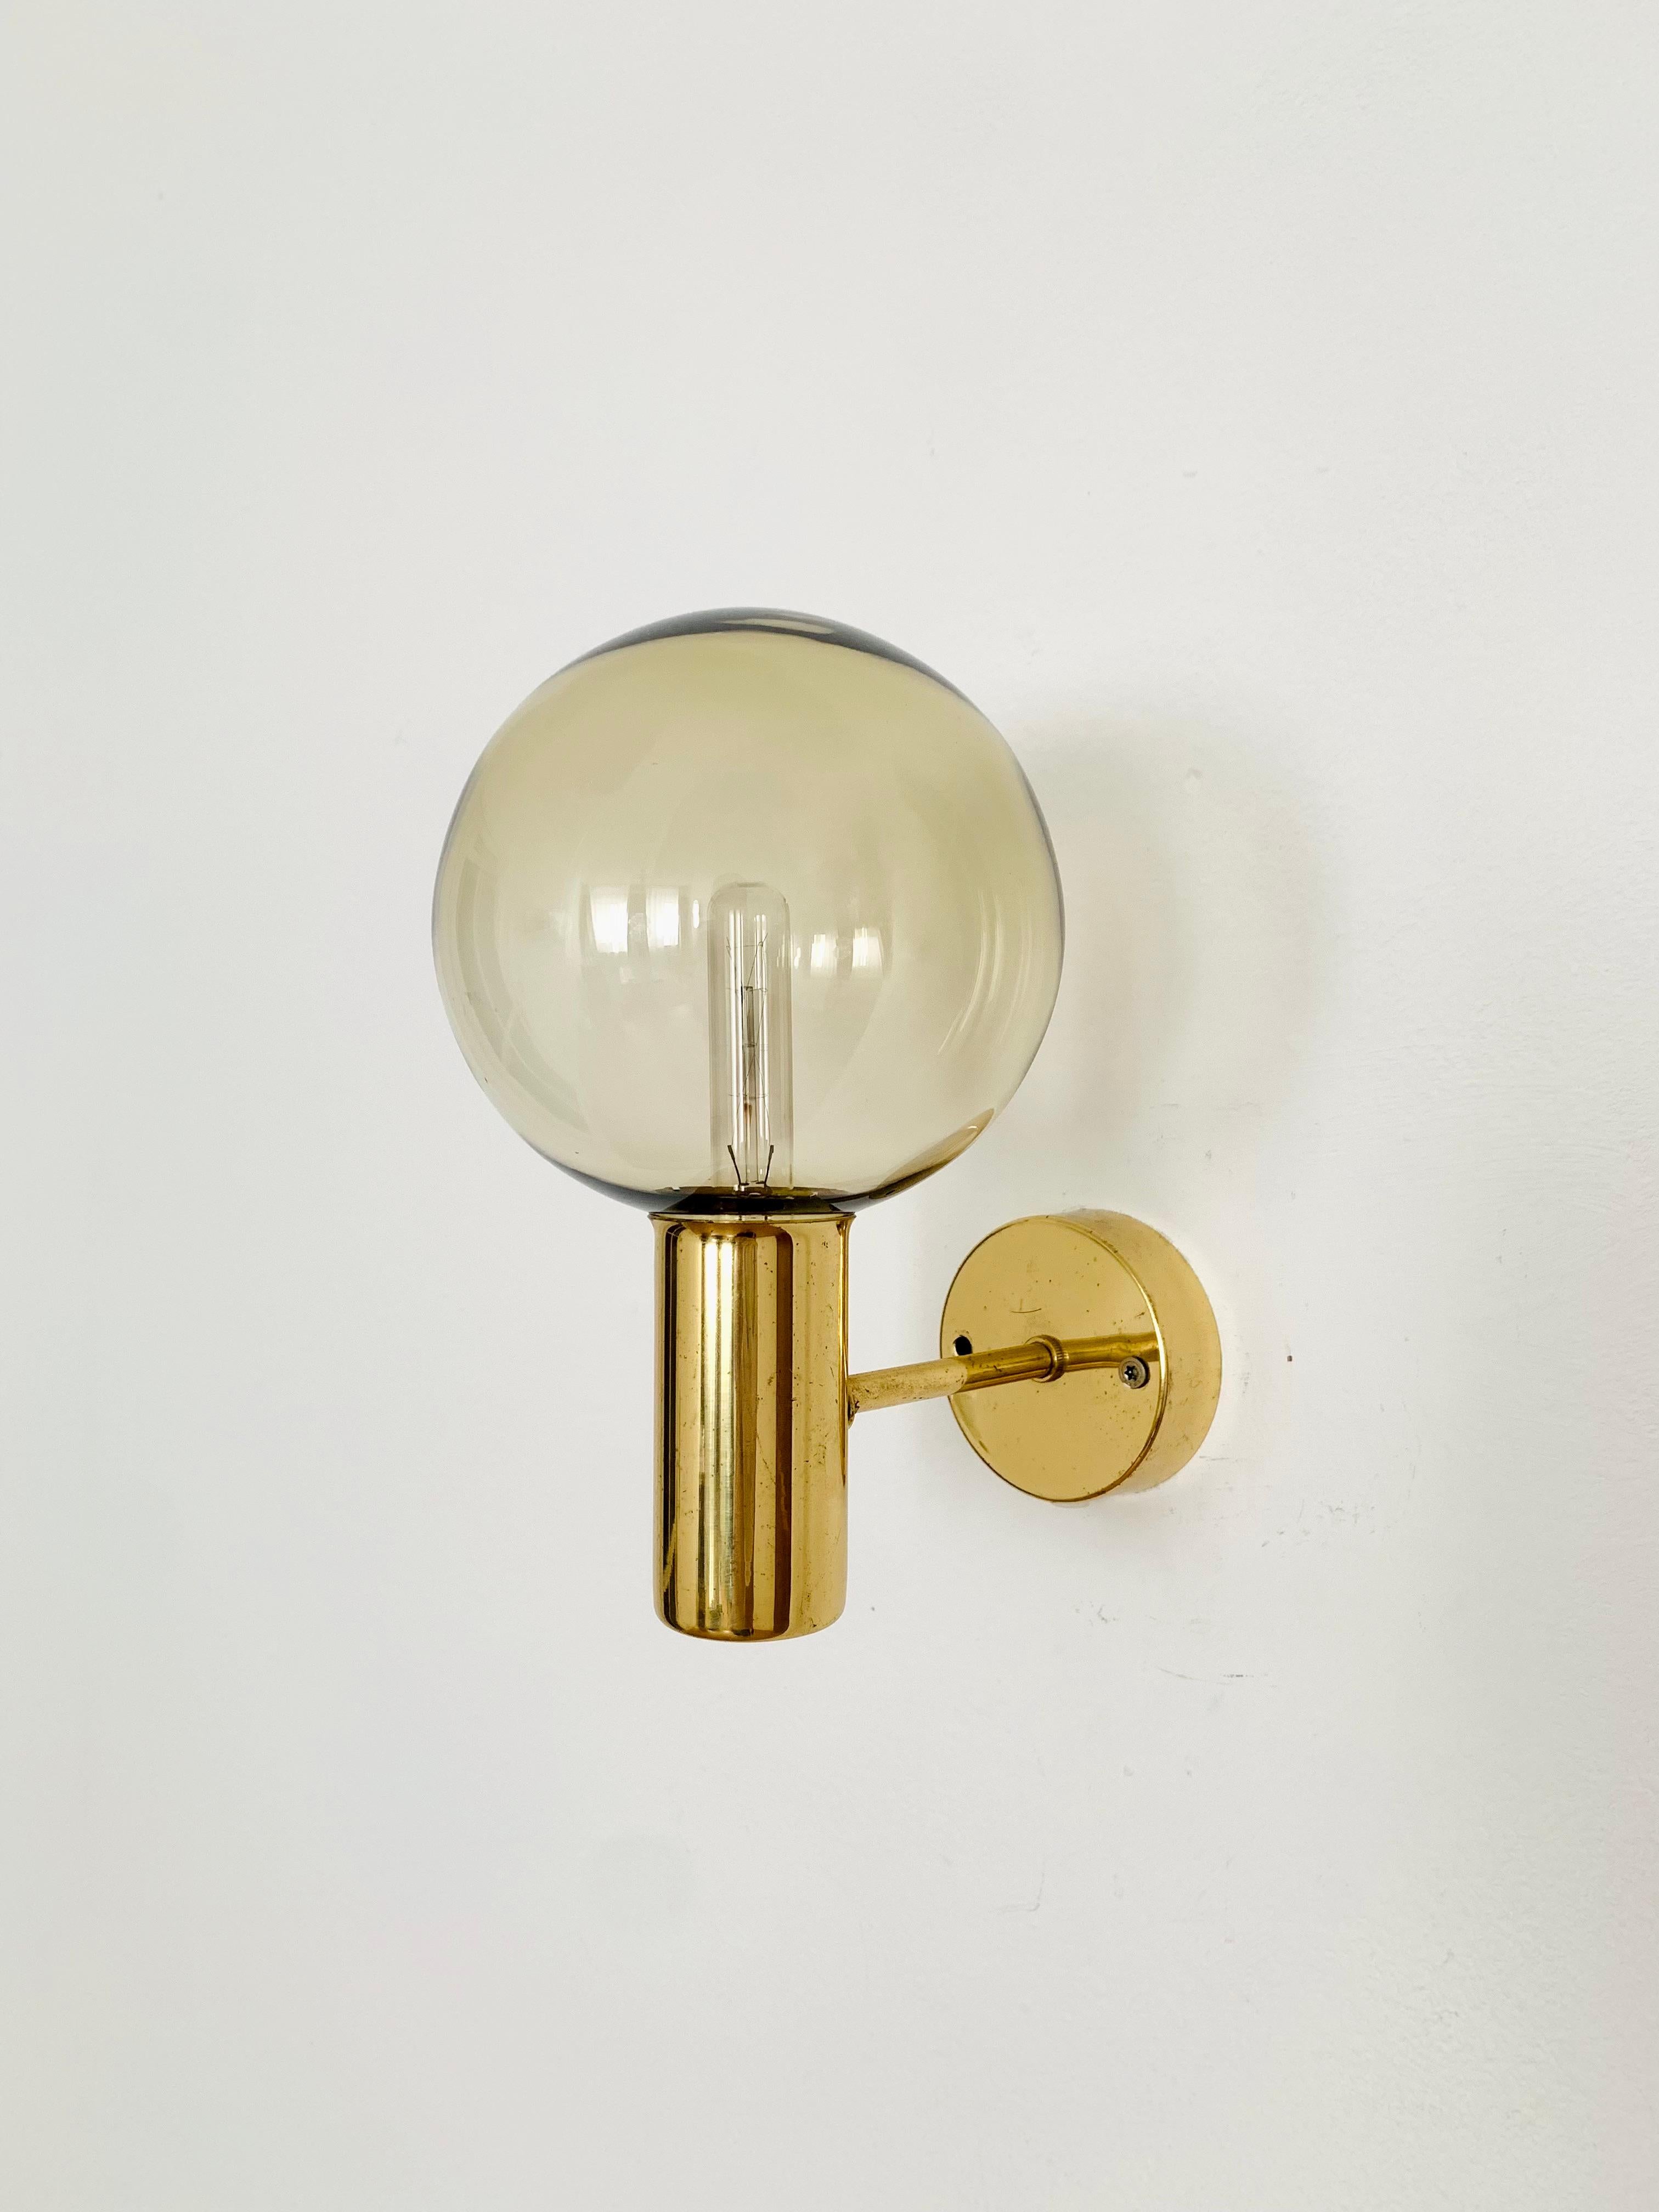 Stunning wall lamp from the 1960s.
Very luxurious design and high quality workmanship.
The lamp is a real asset and an absolute favorite for every home.
A very sparkling light is created.

Manufacturer: Markaryd AB Ellysett
Design: Hans Agne